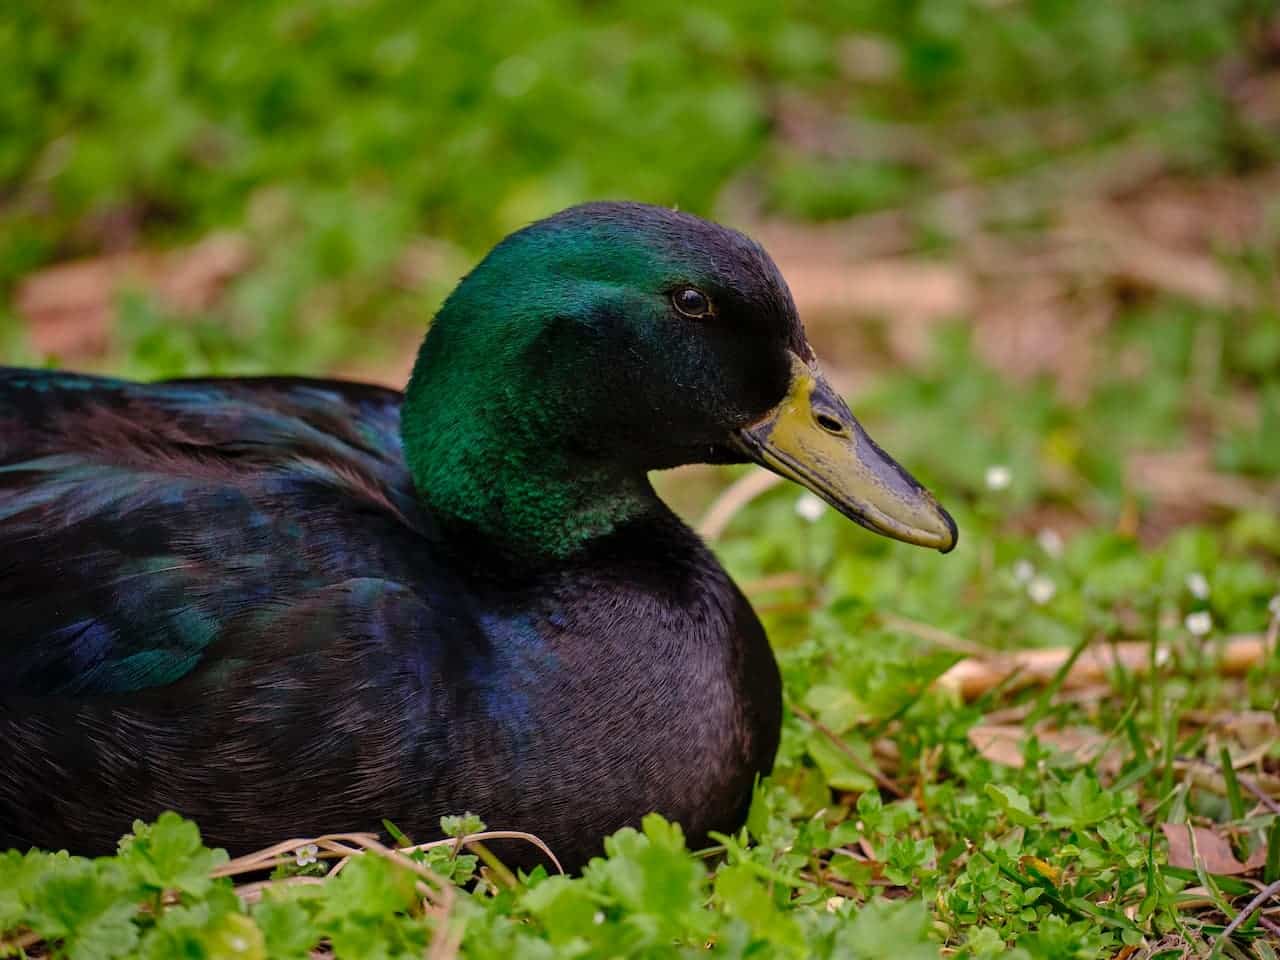 A duck lying on the grass